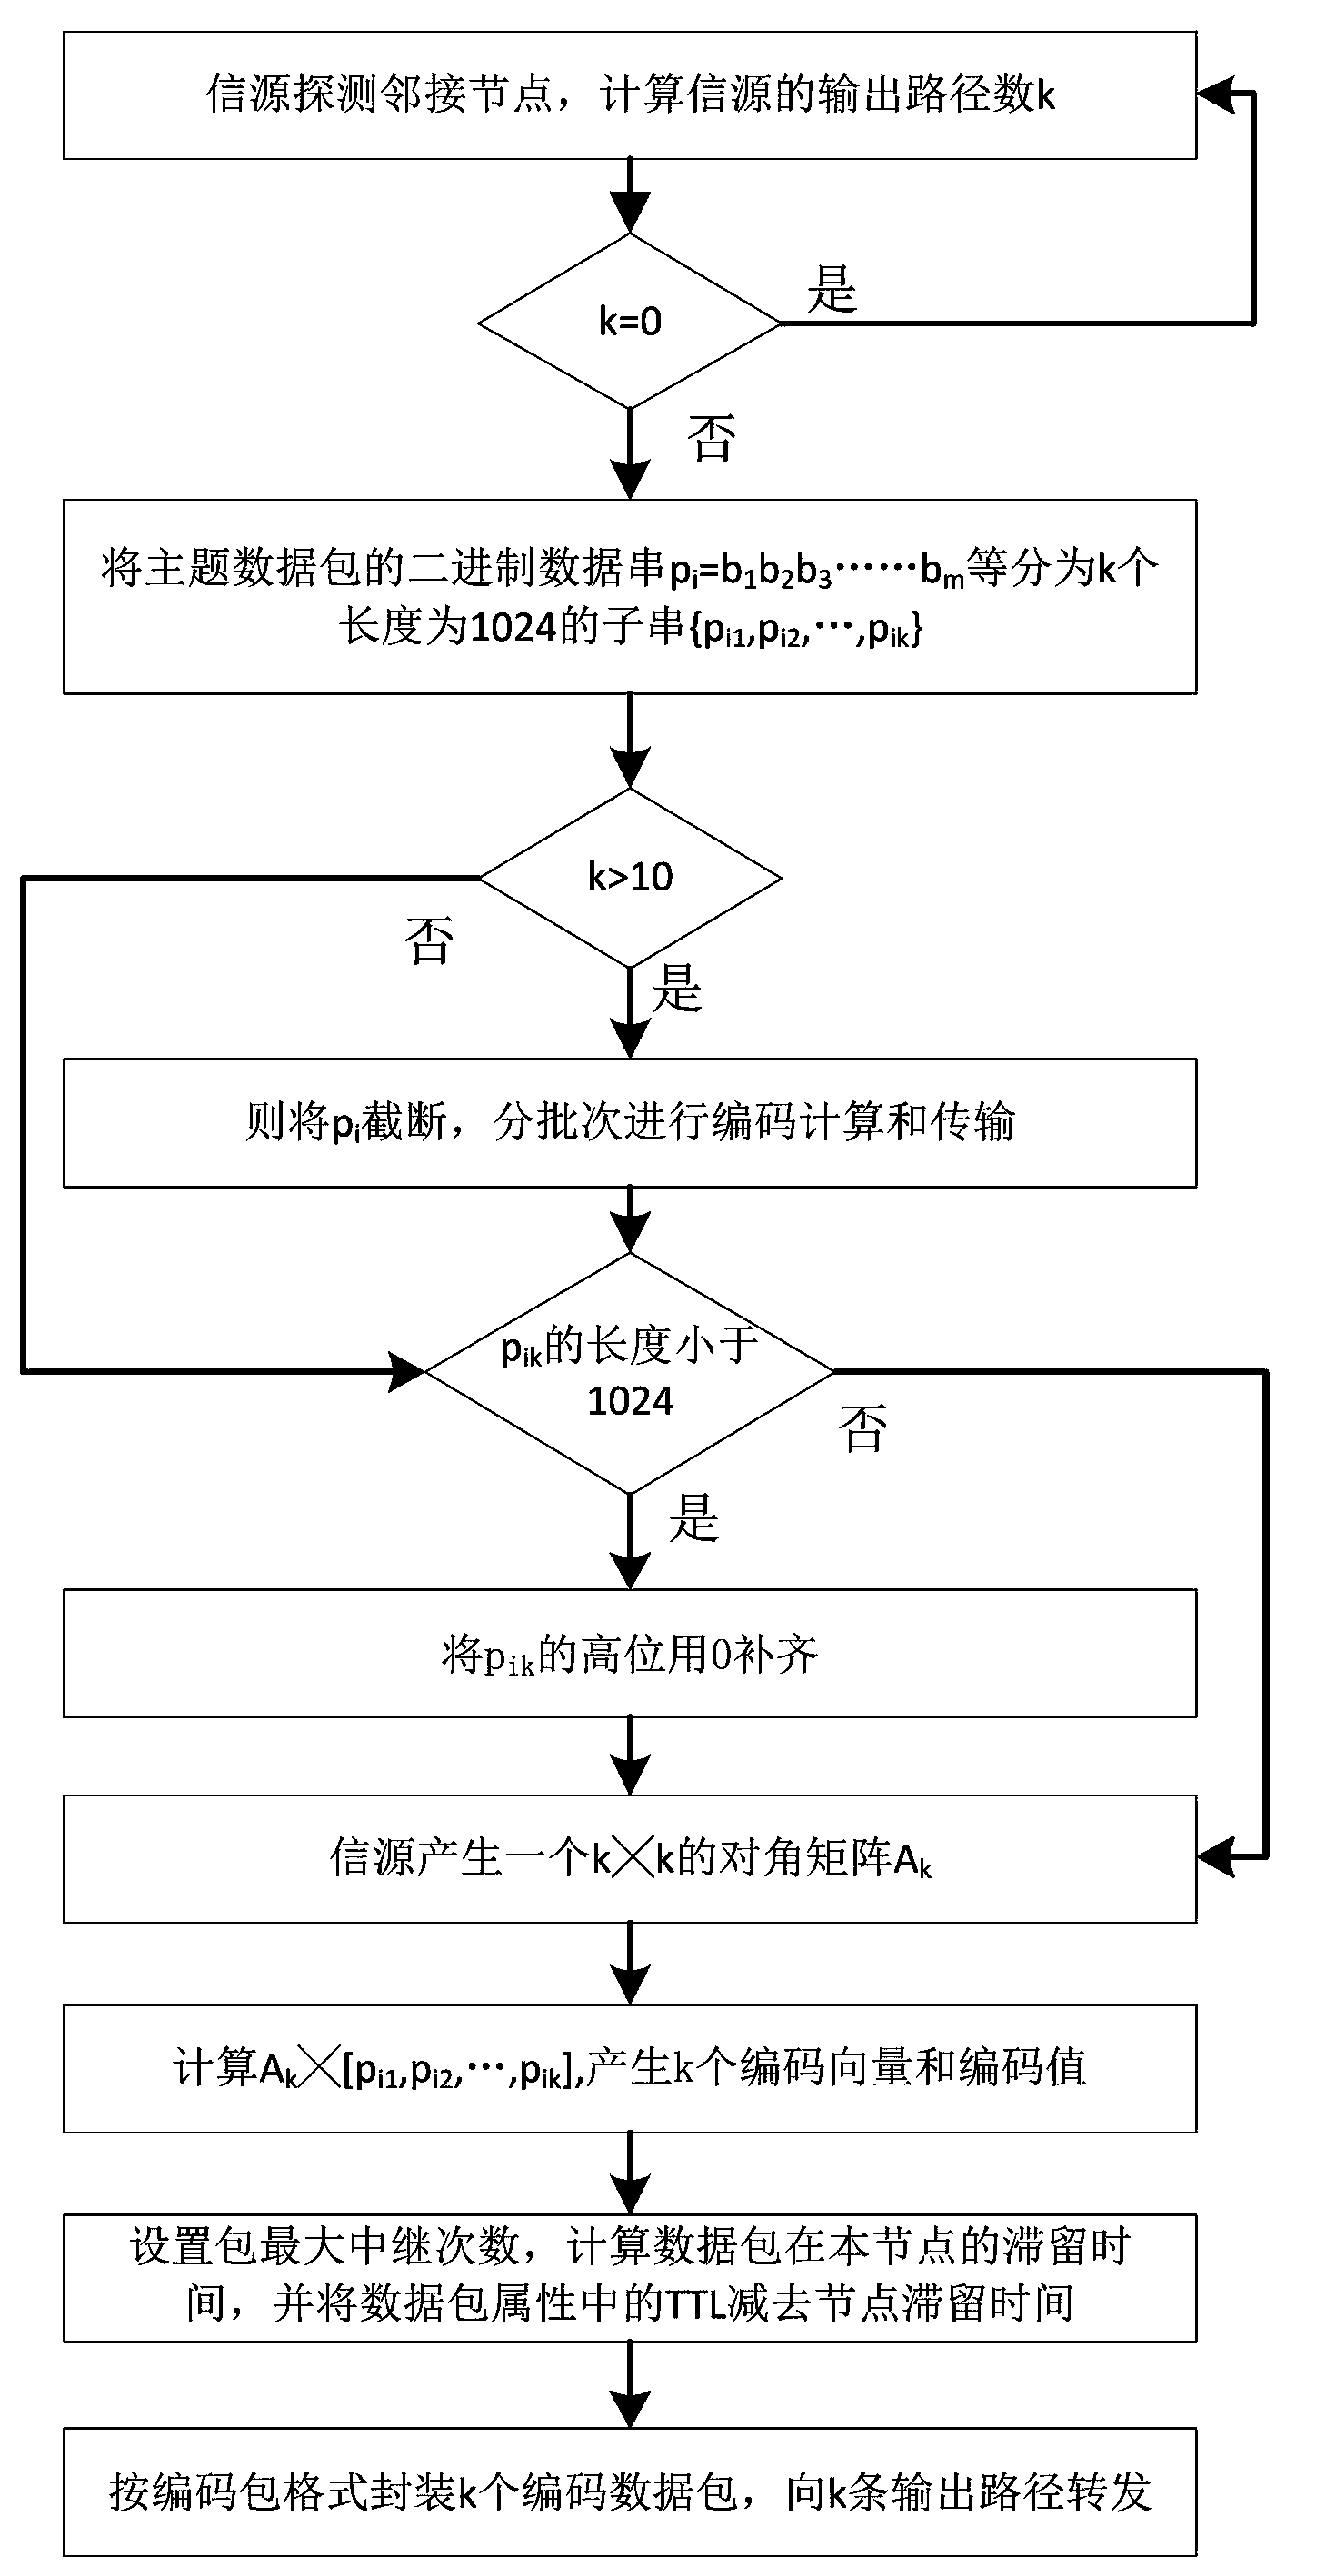 Data subscription and distribution method applicable to delay-tolerant and disconnection-tolerant network